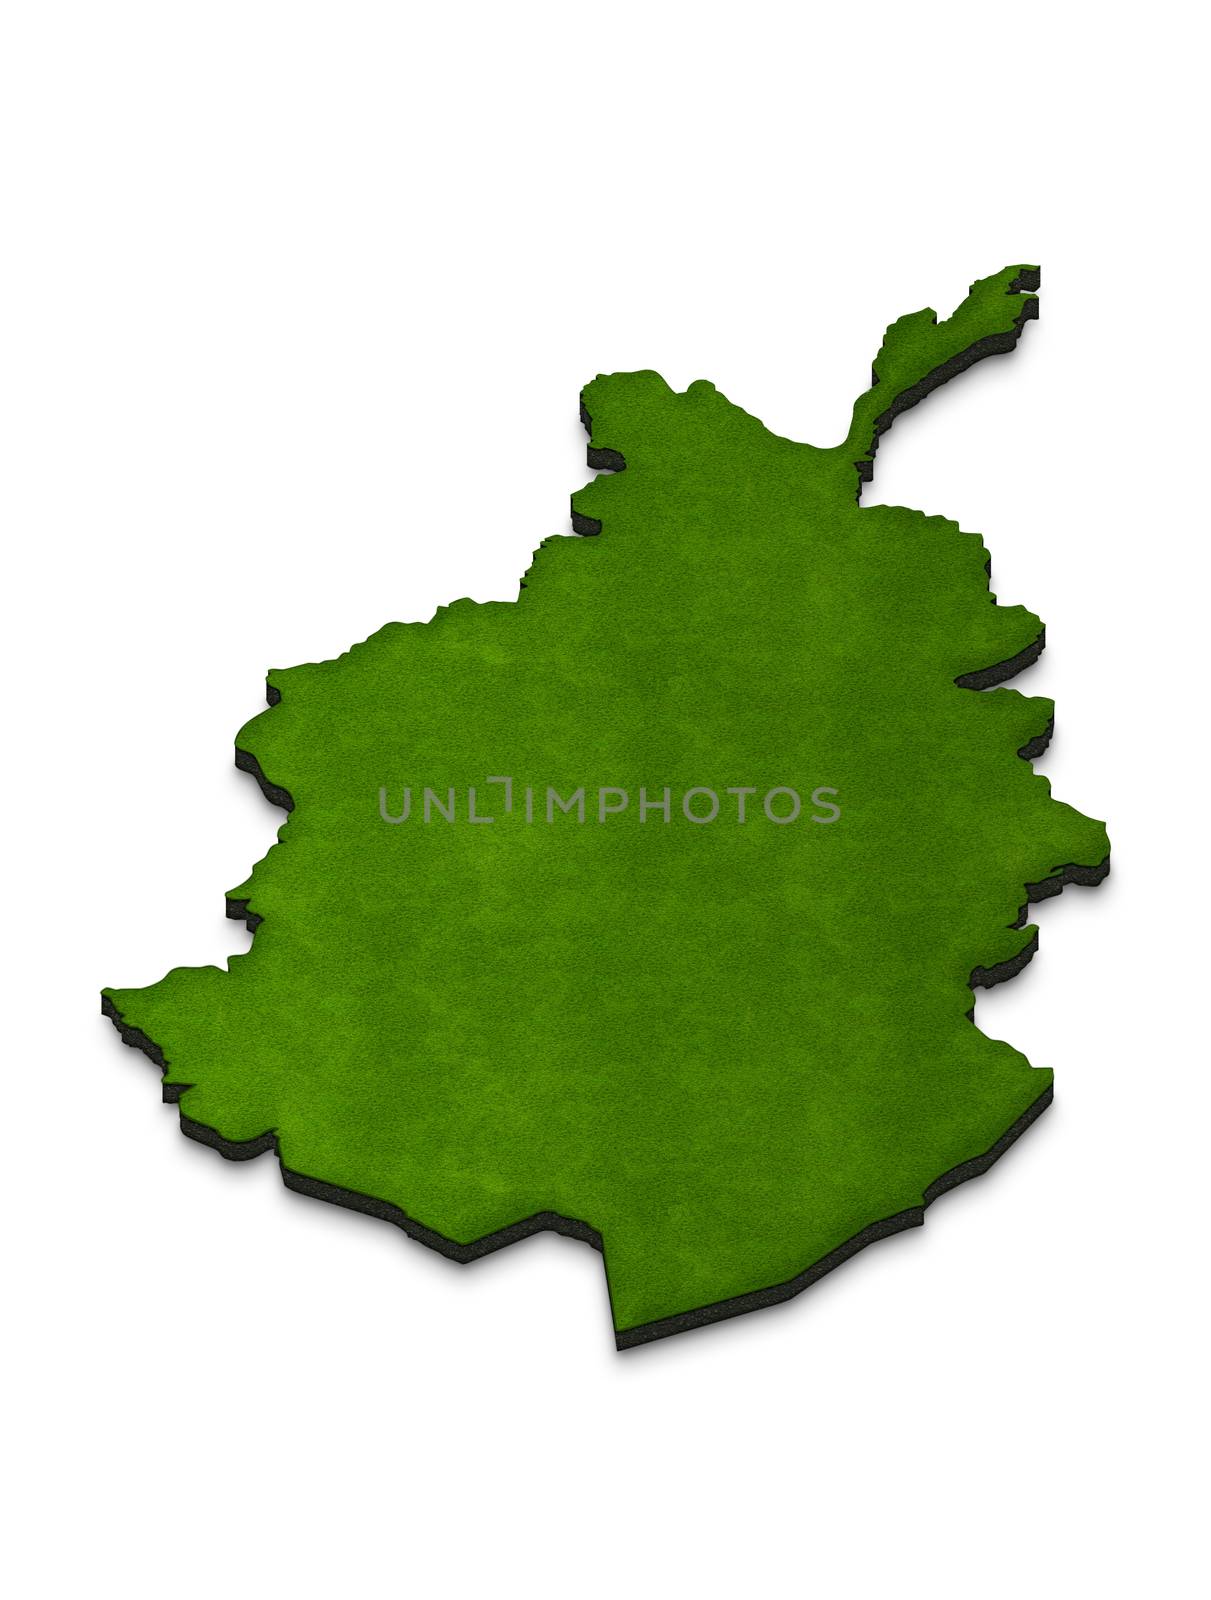 Illustration of a green ground map of Afghanistan on isolated background. Right 3D isometric perspective projection.